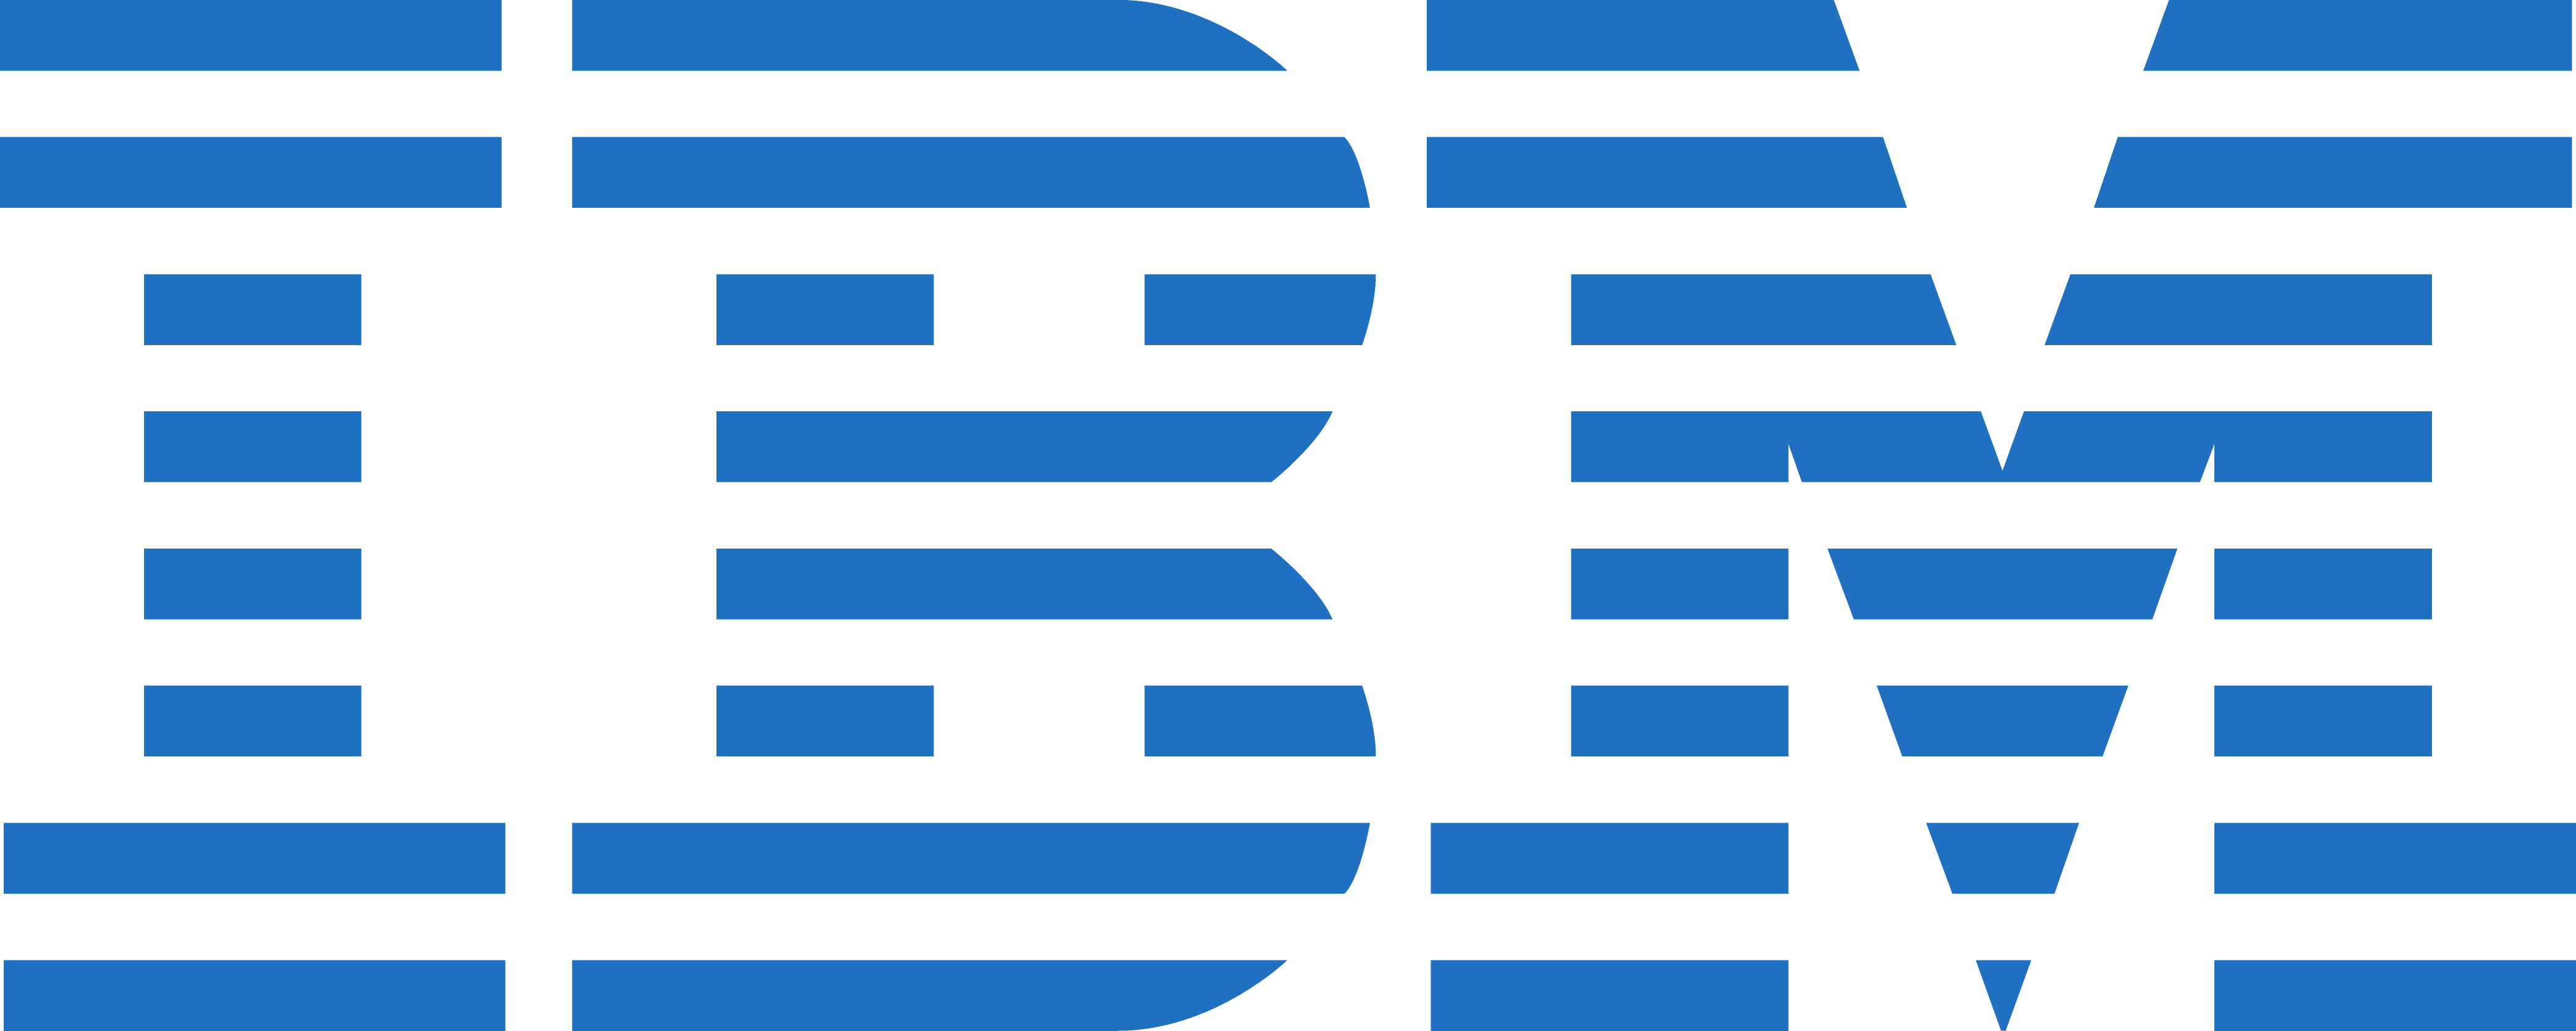 IBM iSeries Logo - With my experience as a consumer response agent, I heavily utilized